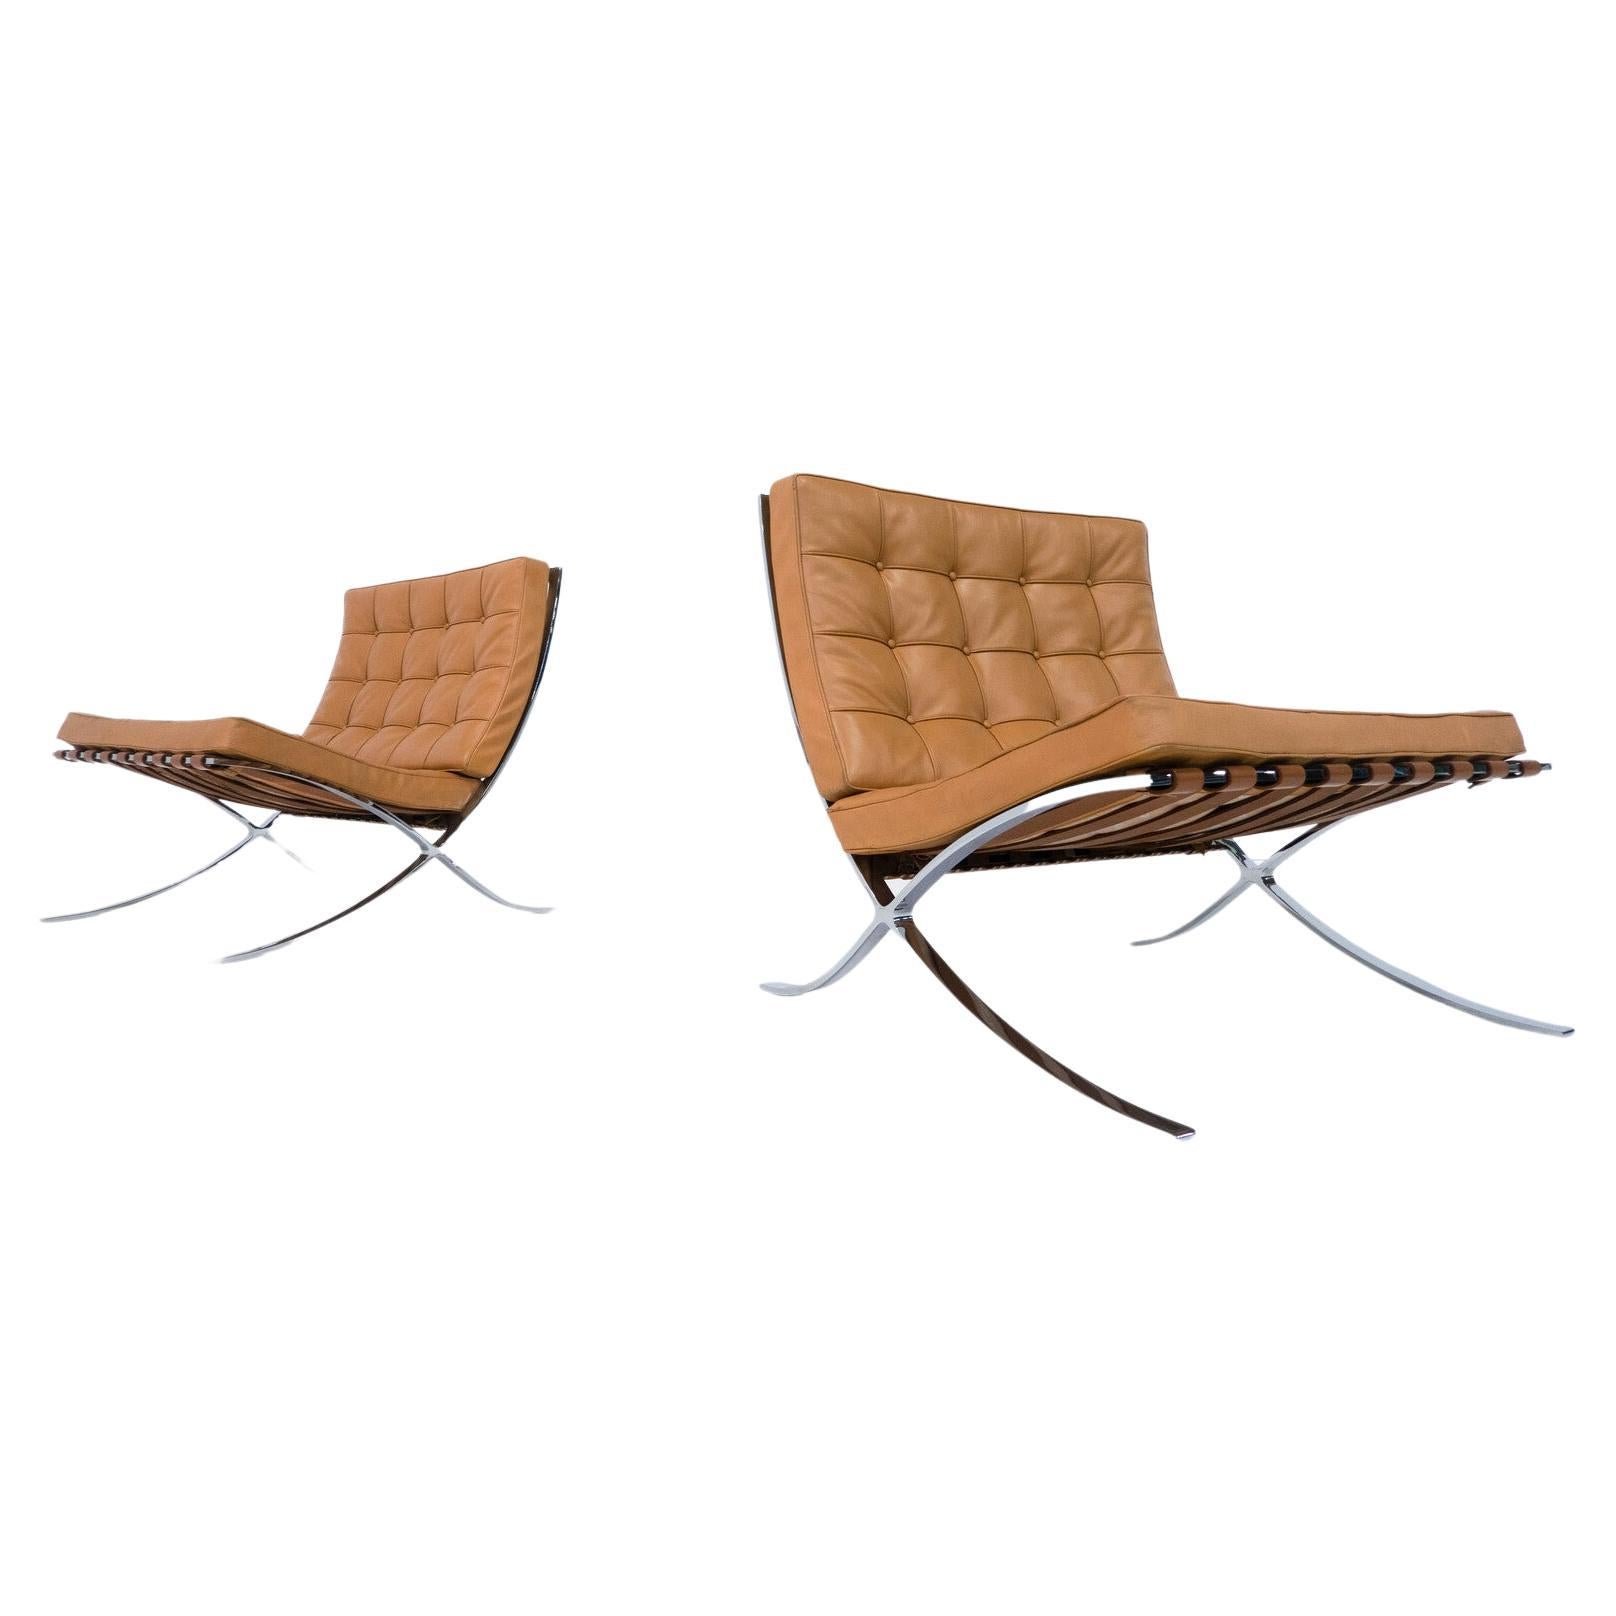 Pair of Cognac Leather Barcelona Chairs by Mies Van Der Rohe for Knoll, 1960s For Sale